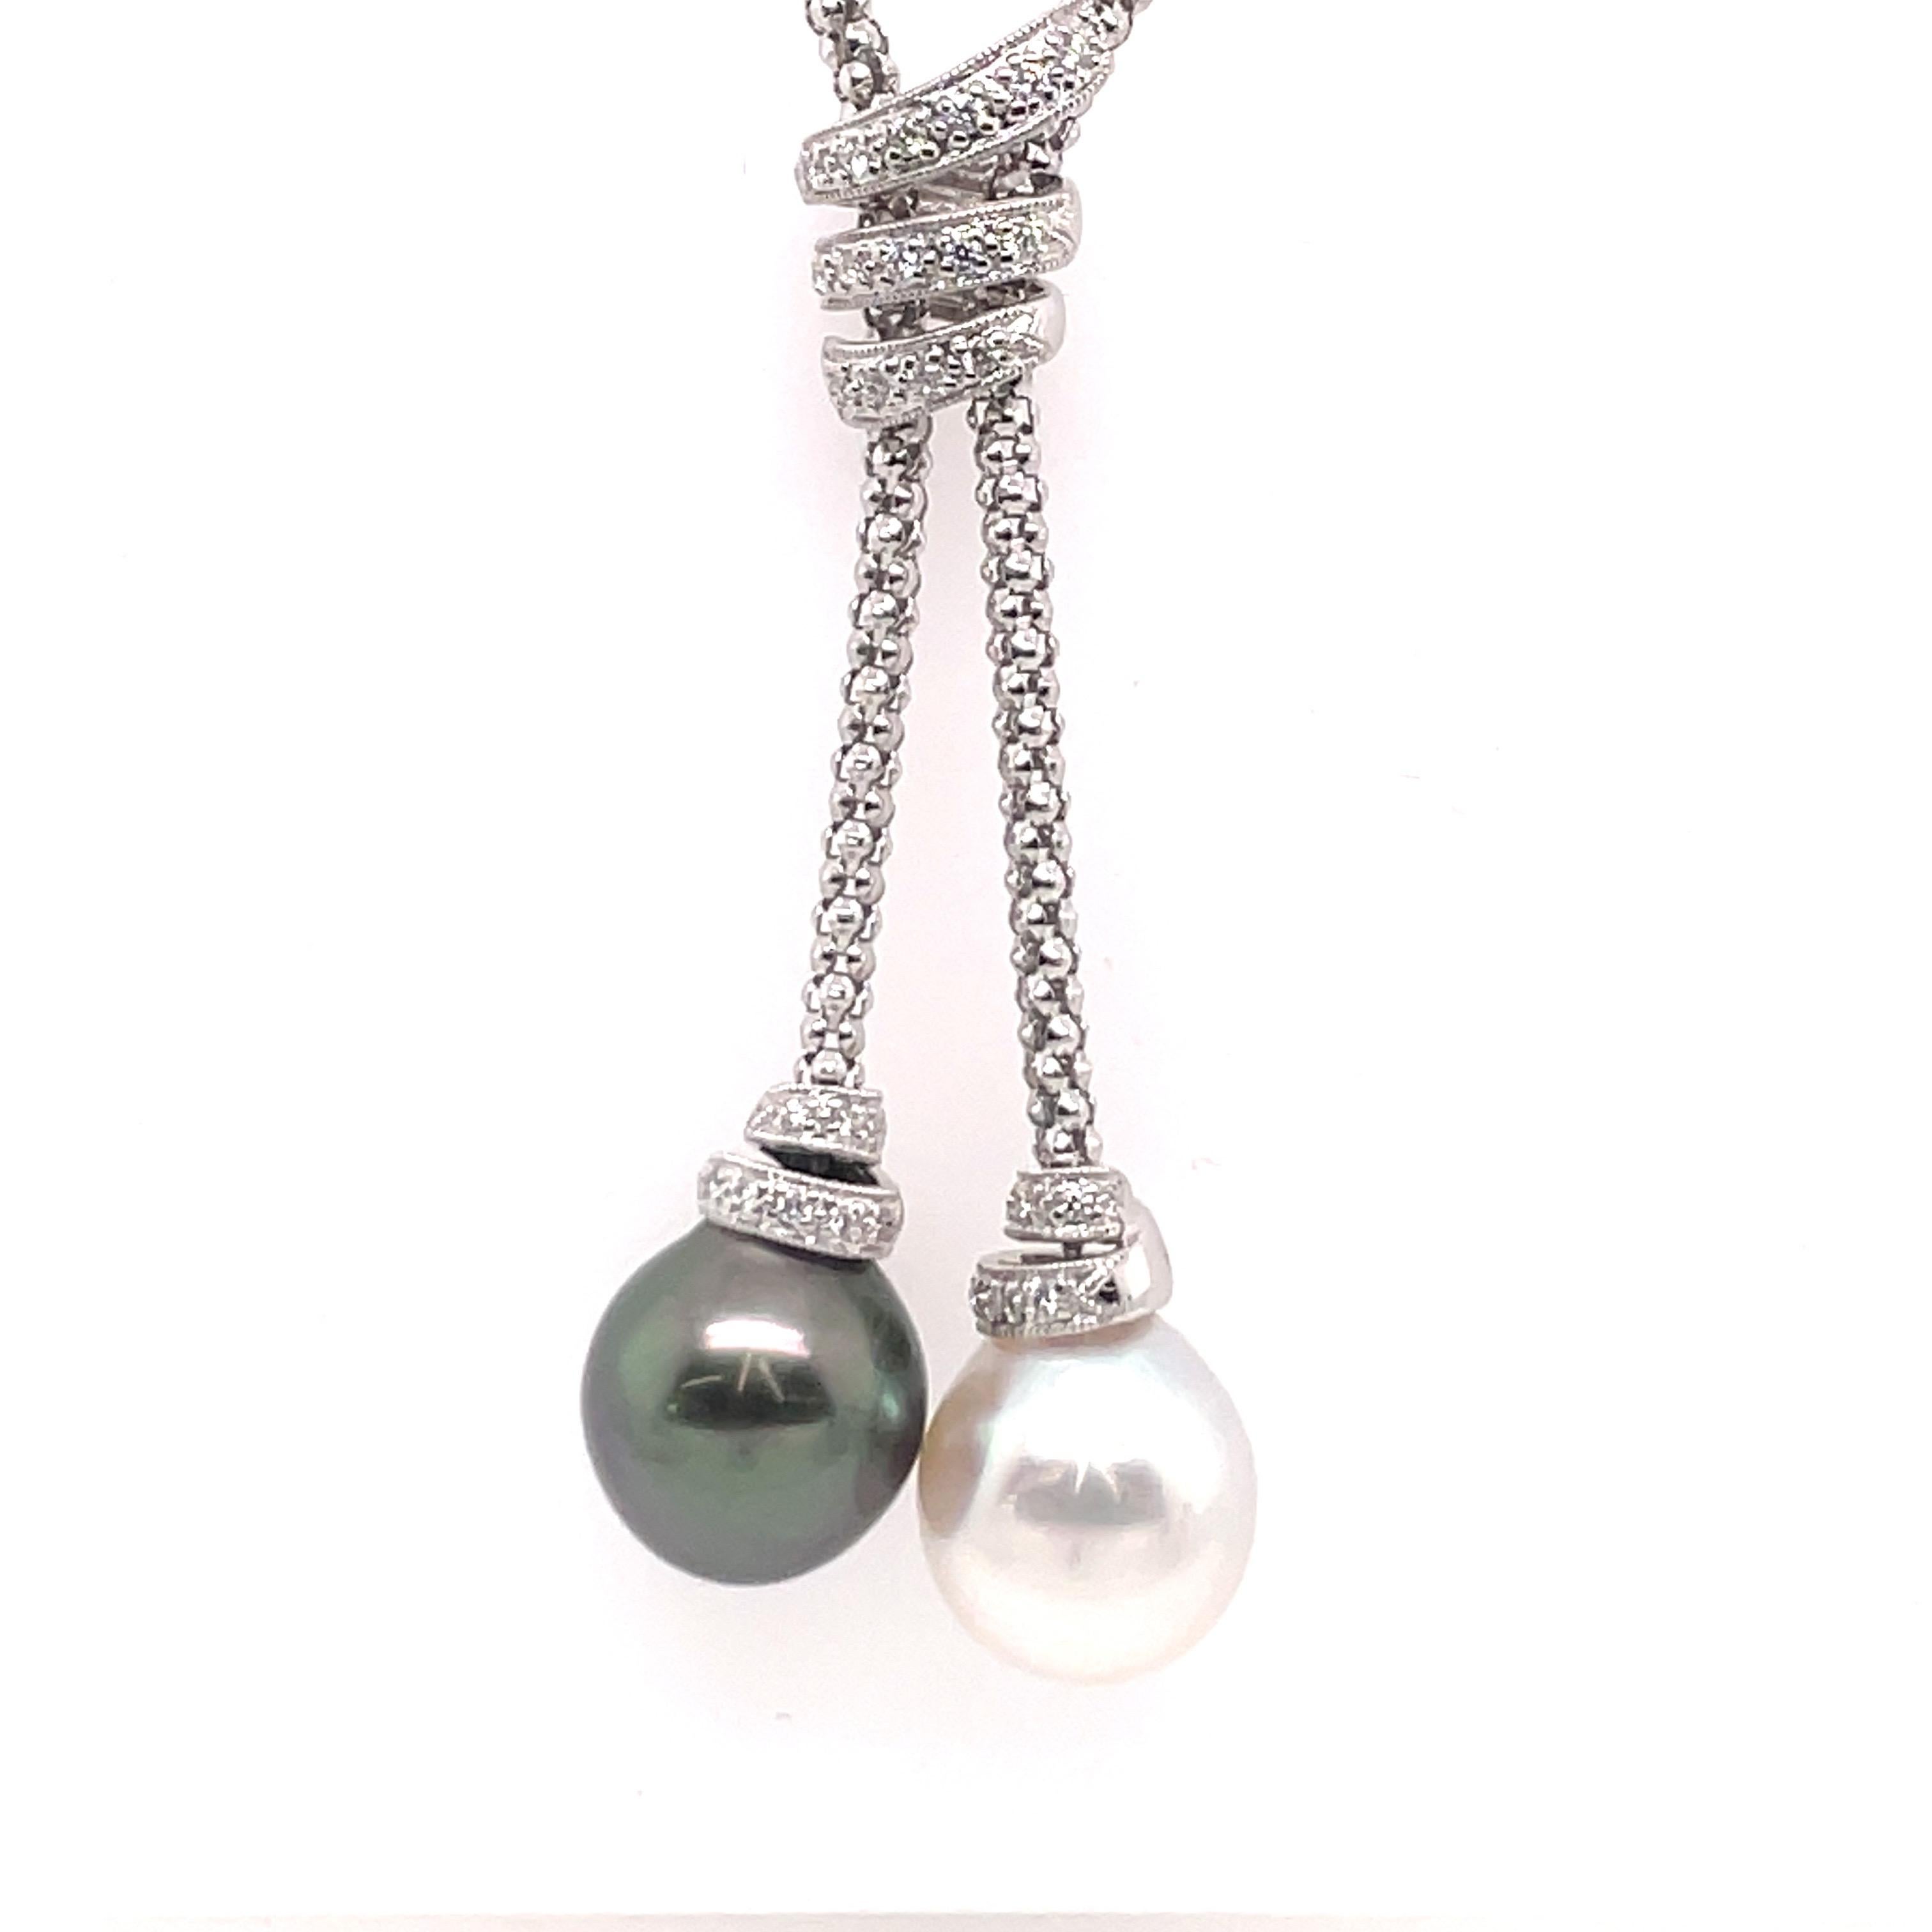 18 Karat White gold chain featuring two Pearls, one South Sea & one Tahitian measuring 12-13 MM with 31 round brilliants weighing 0.31 carats. 
18 inch chain
Tassel 5/8 X 13/16

